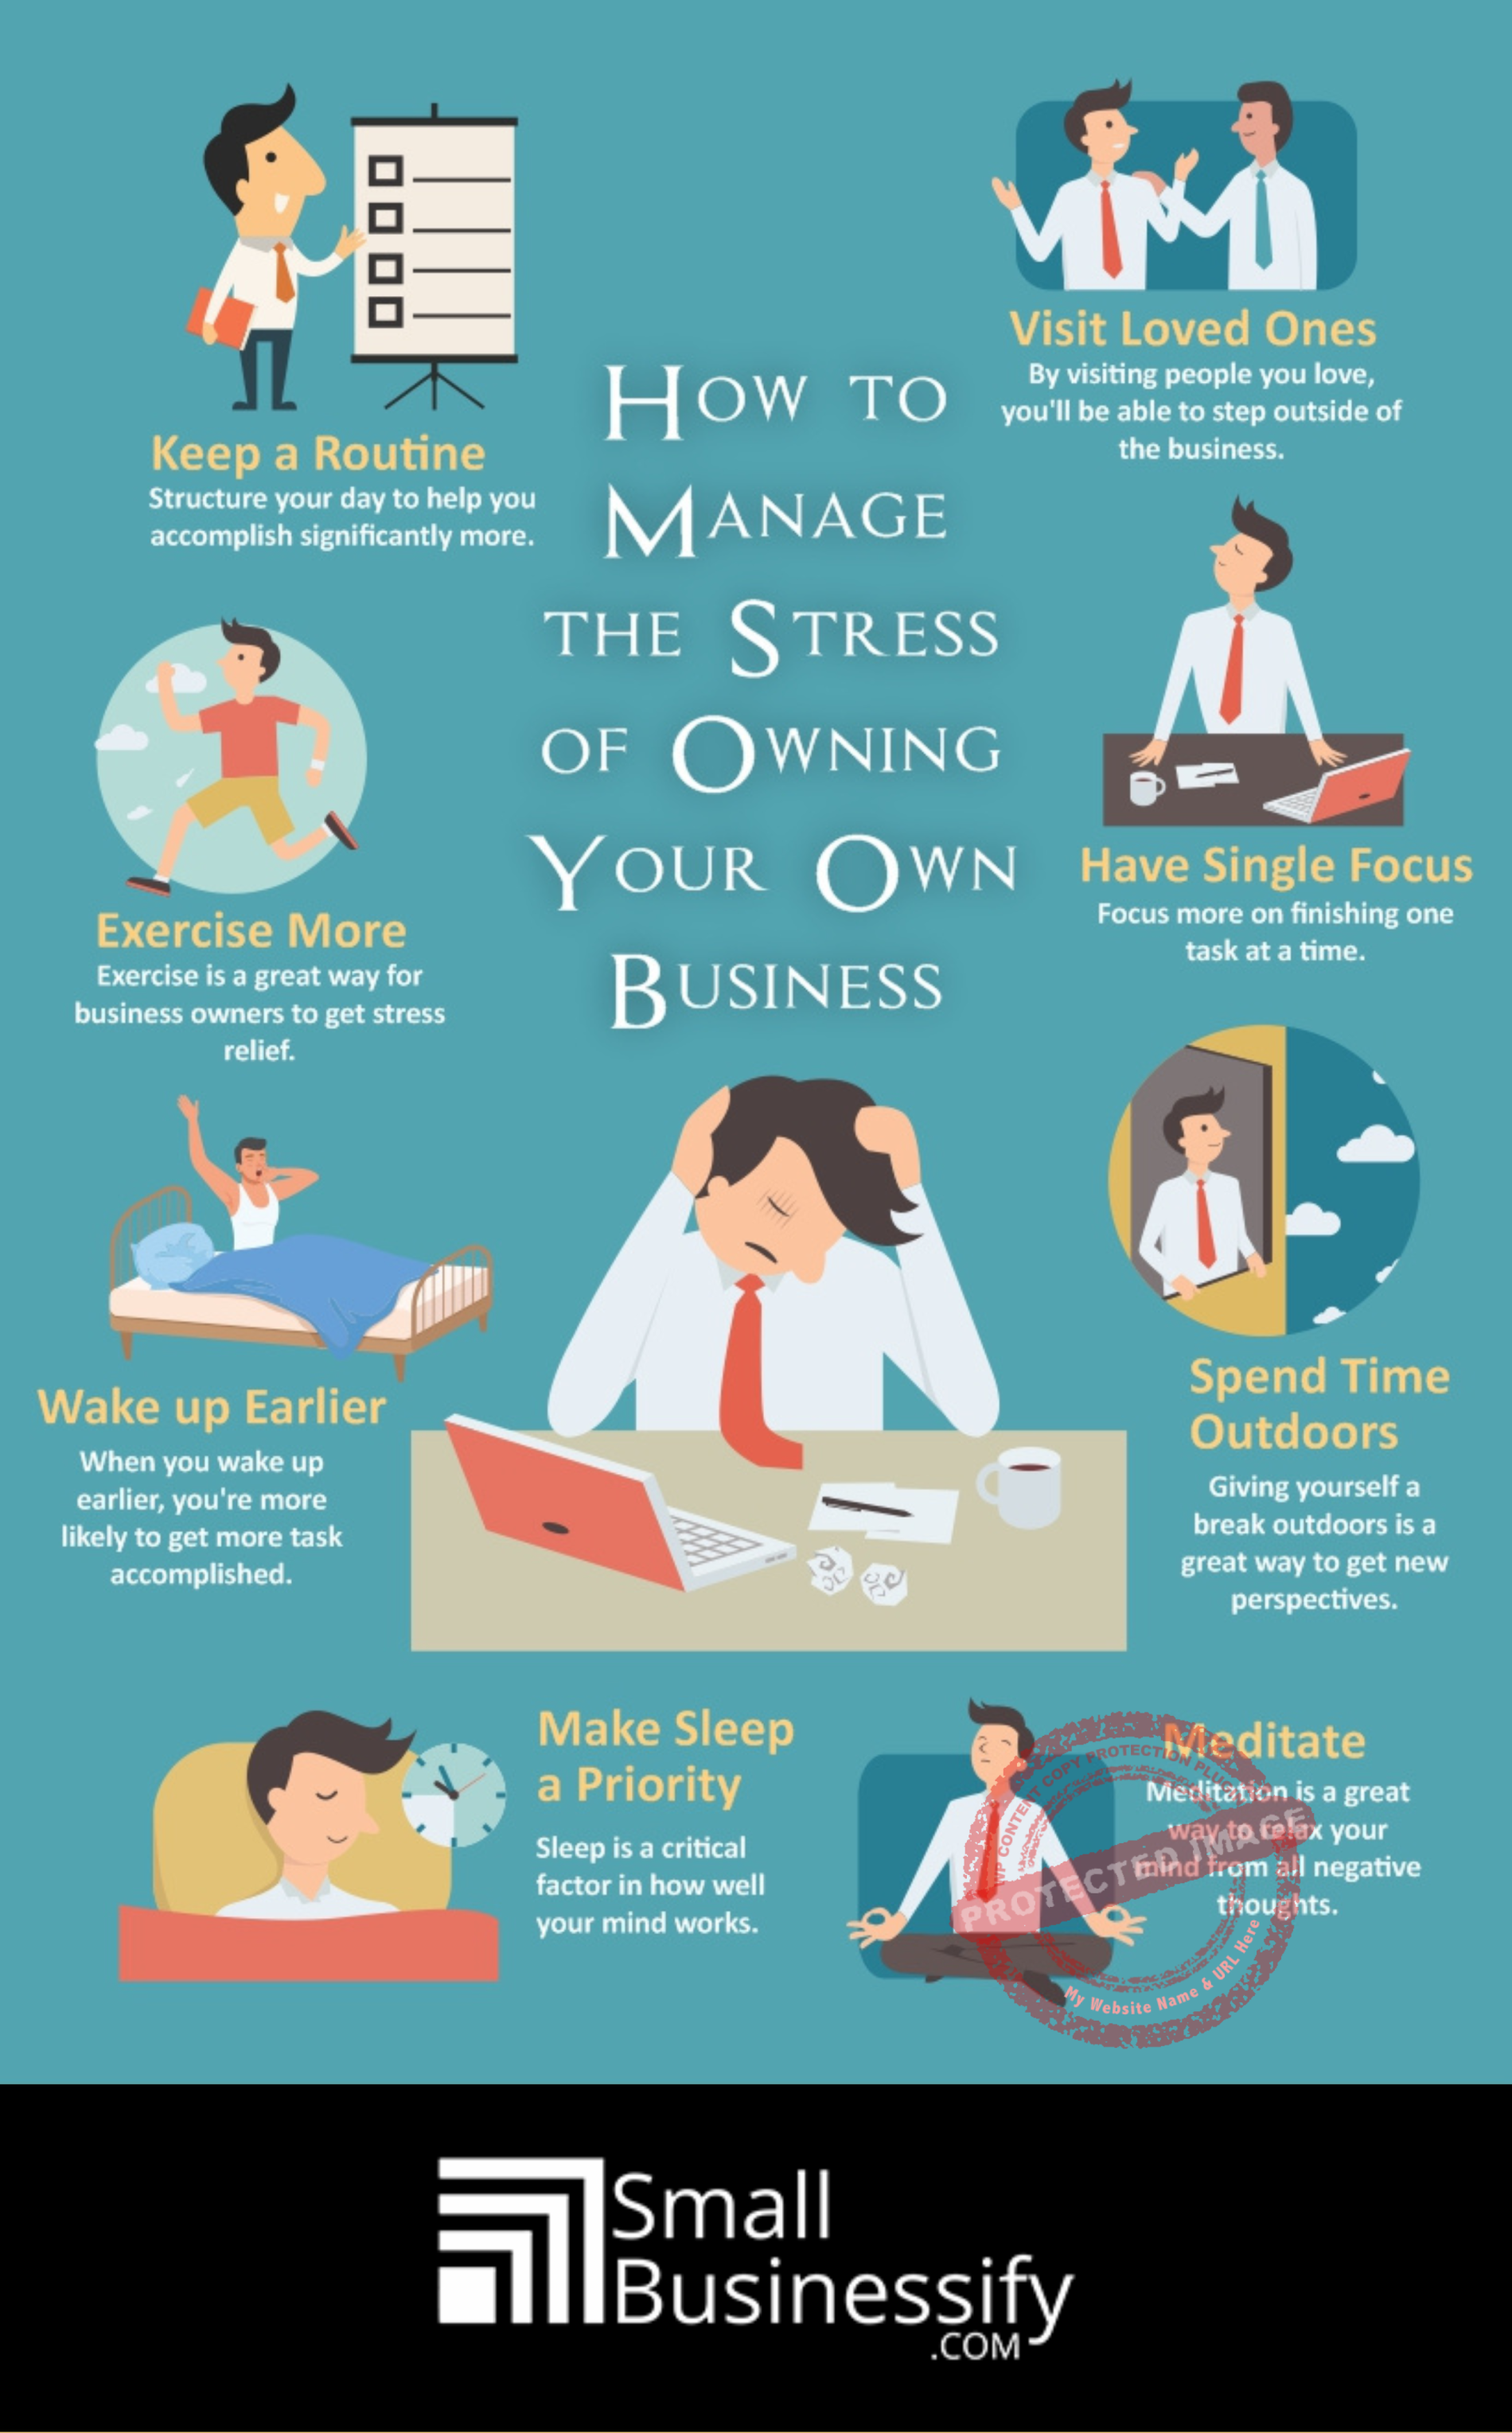 How to manage the stress of owning your own business infographic